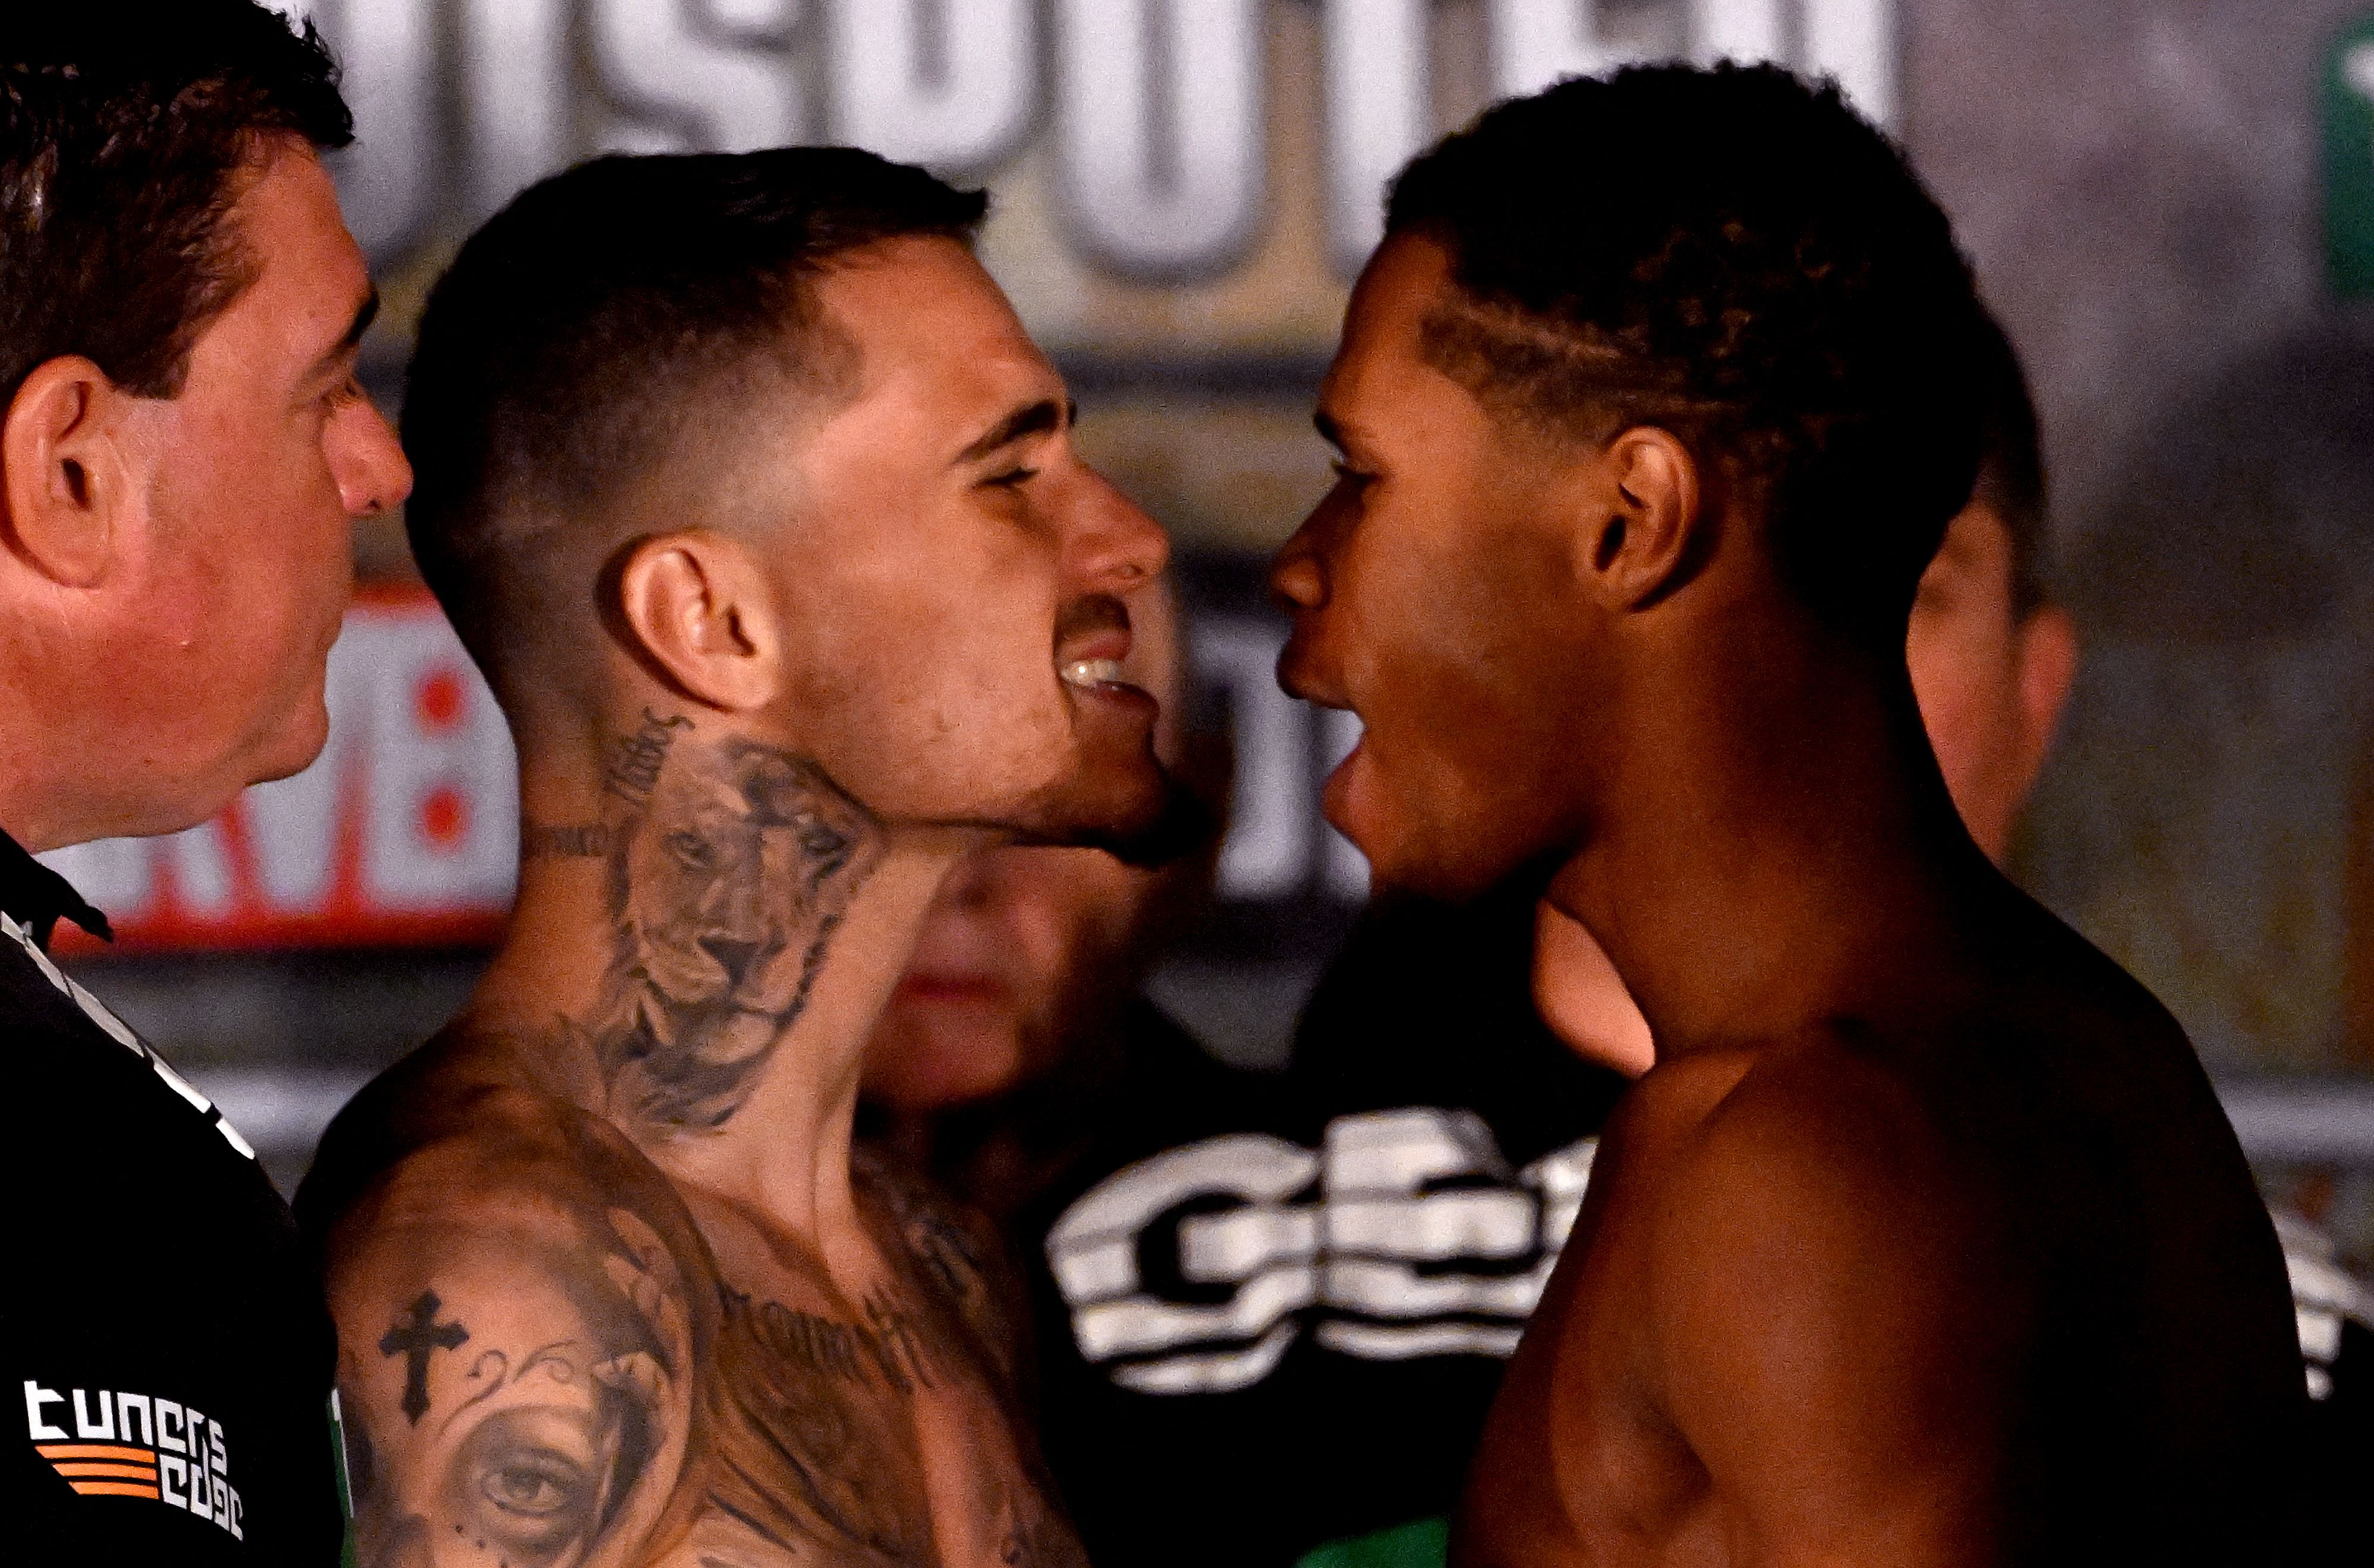 George Kambosos Jr and Devin Haney fight for undisputed at lightweight